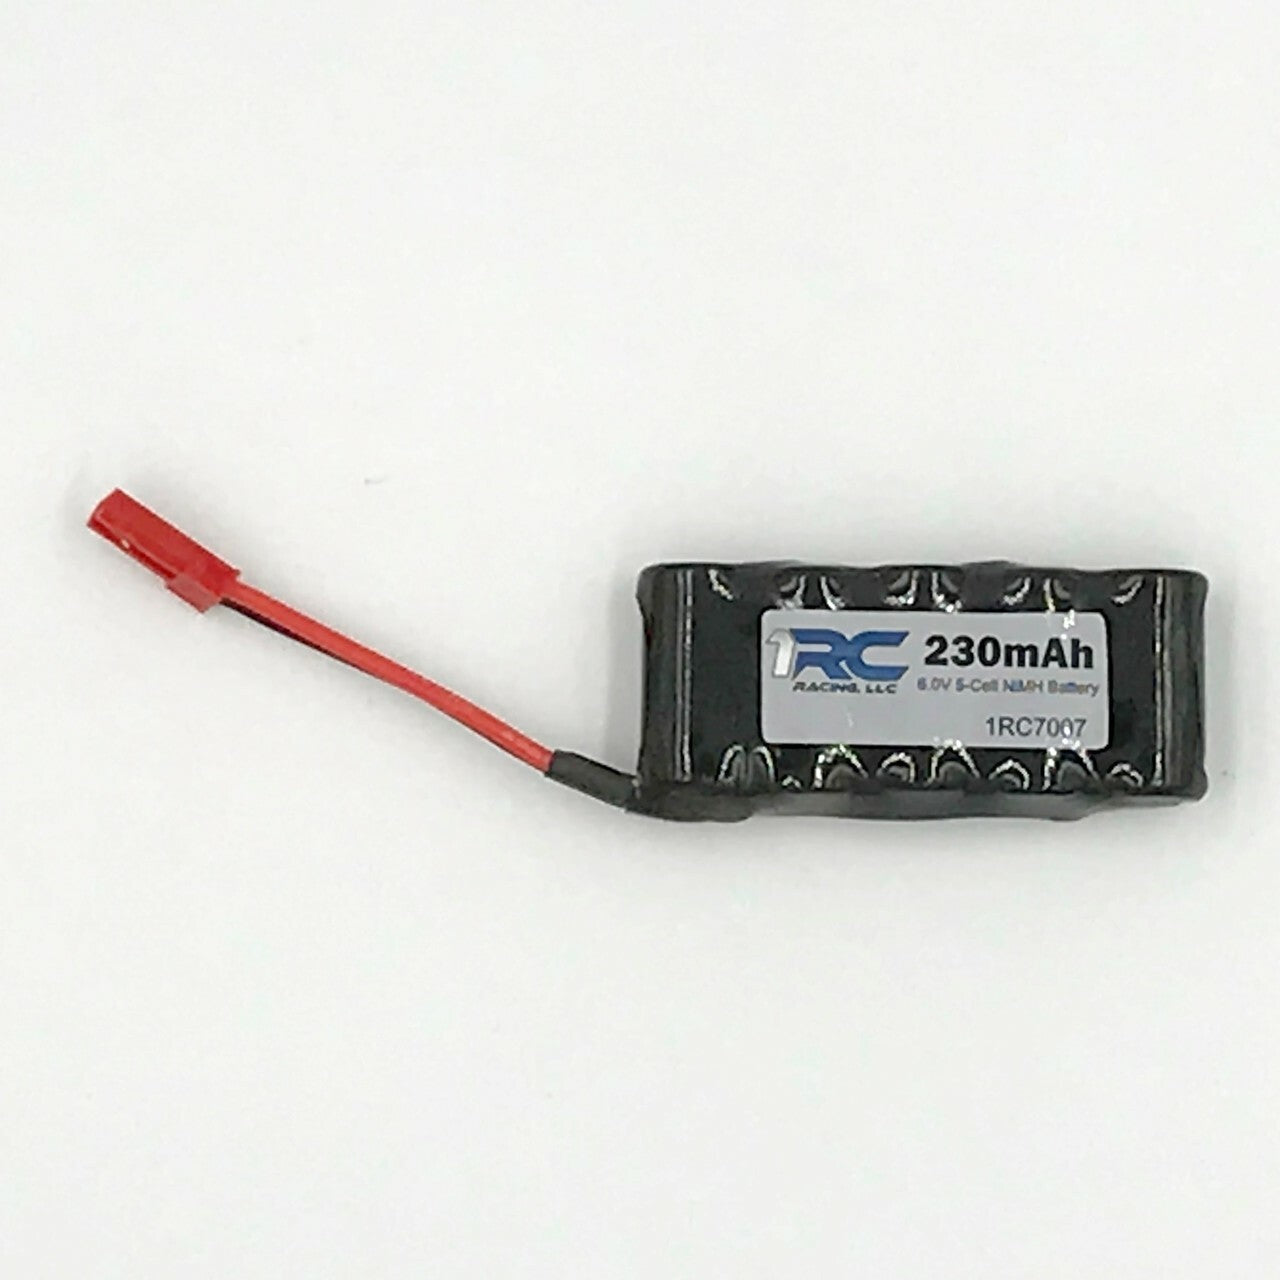 Brand_1RC-Racing, Product_Batteries